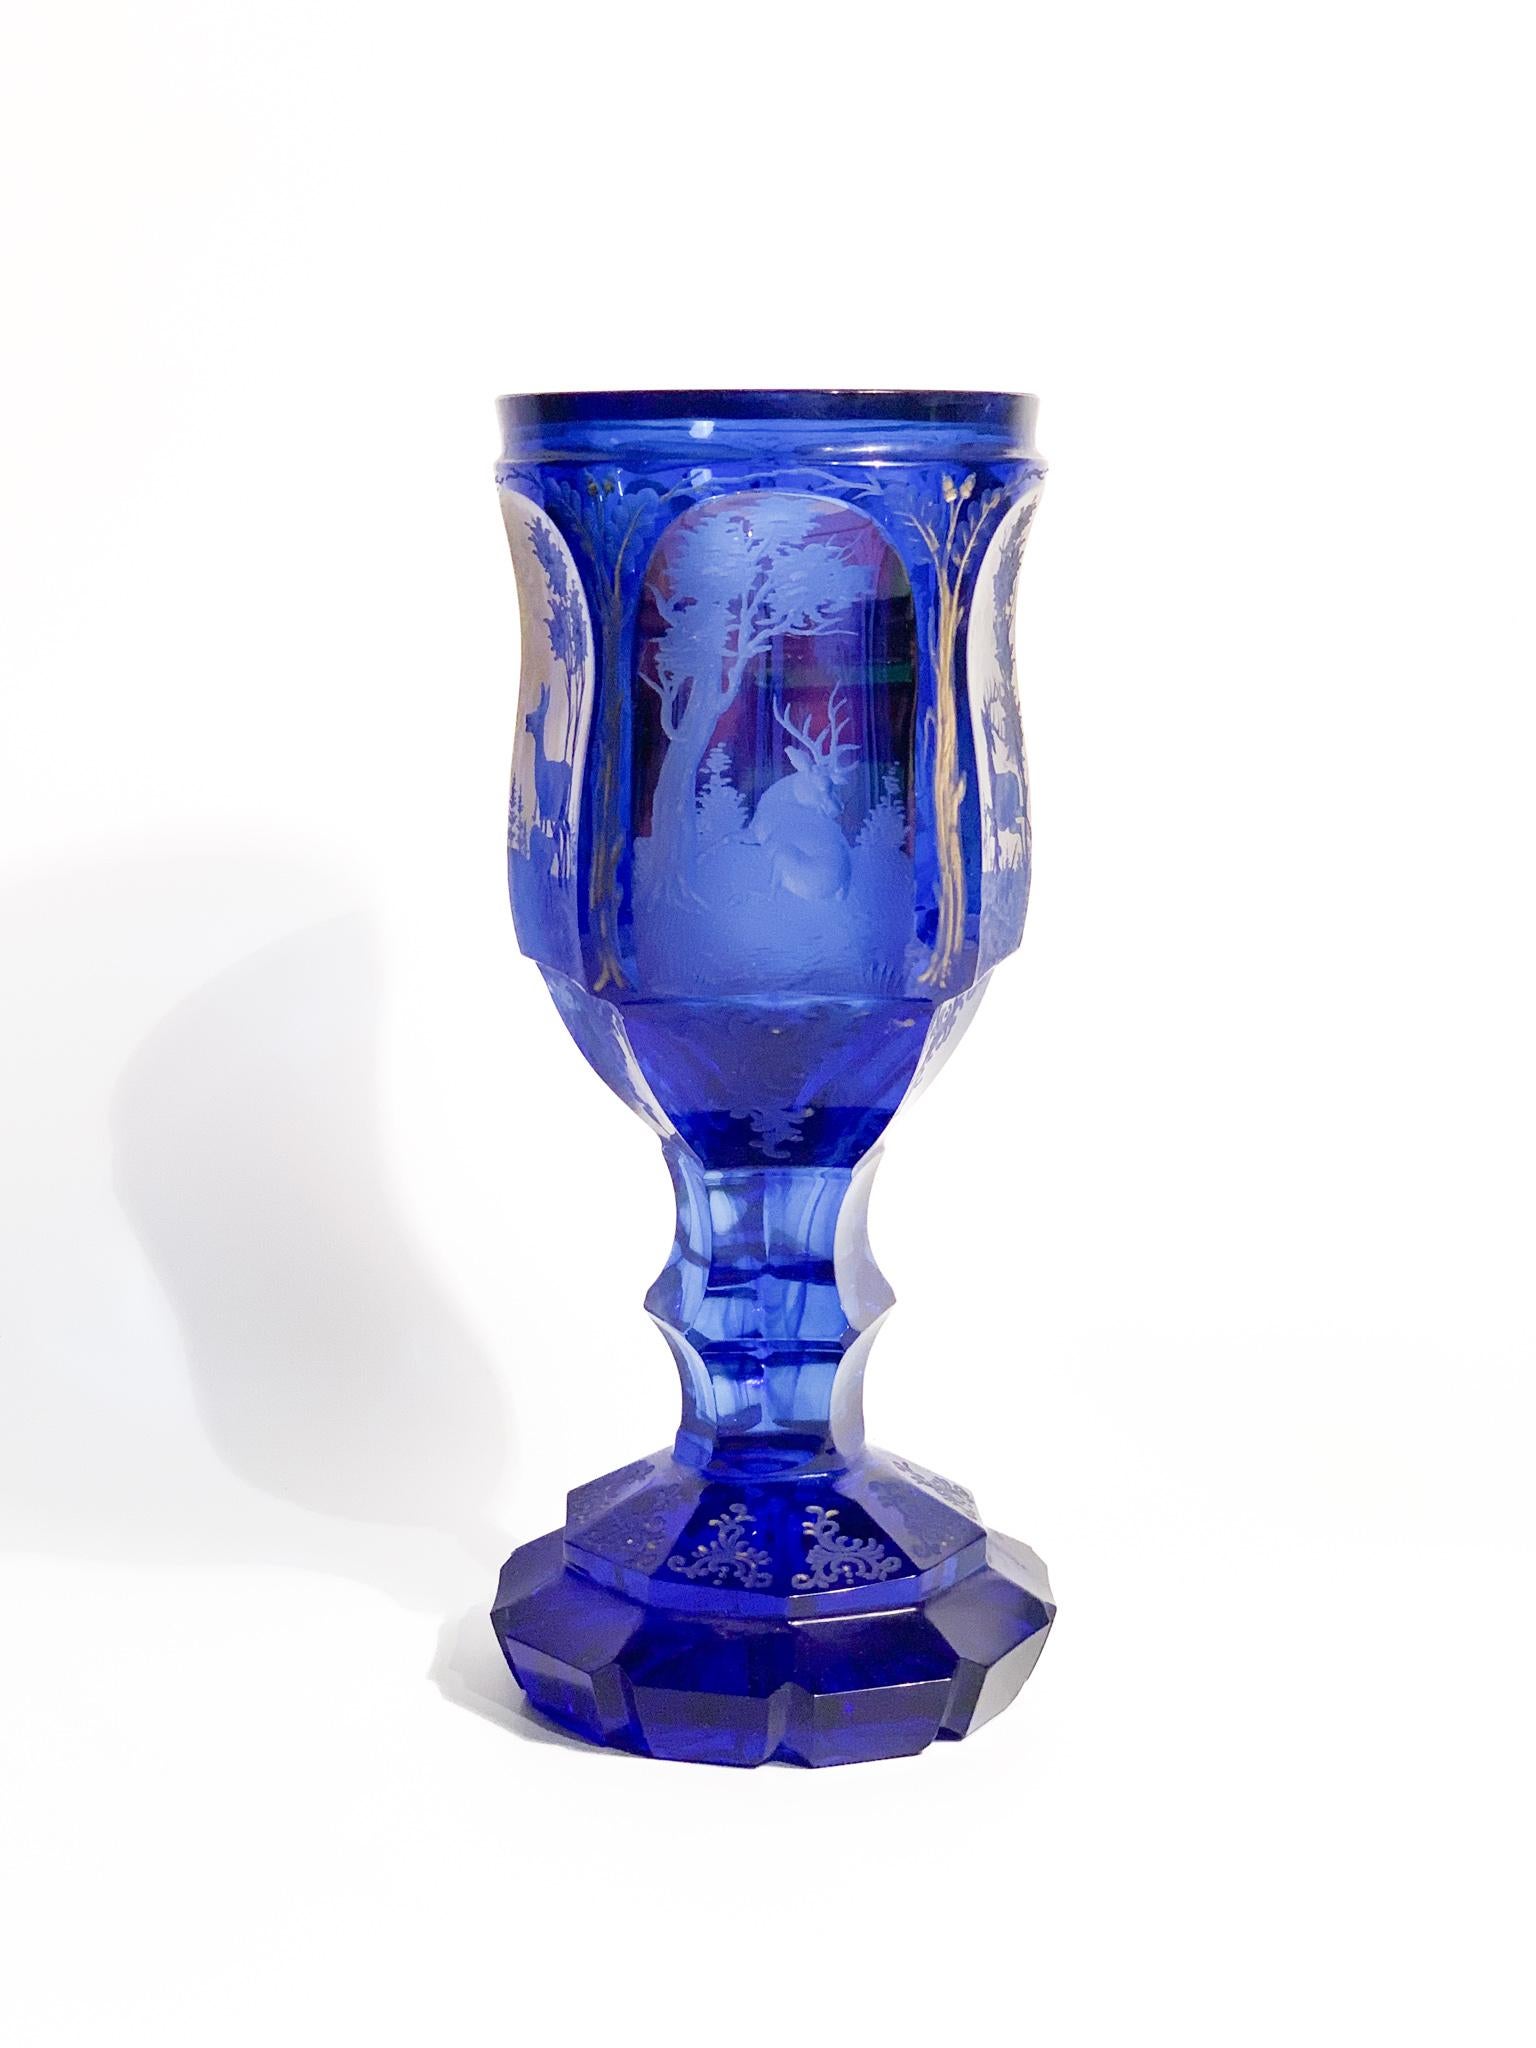 Large goblet in blue and red Biedermeier crystal, acid decorated and made in 1800

Ø cm 9 h cm 20,5

Biedermeier is was an artistic movement that developed between 1815 and 1848. The term initially spread as a derogatory term. Consisting of two